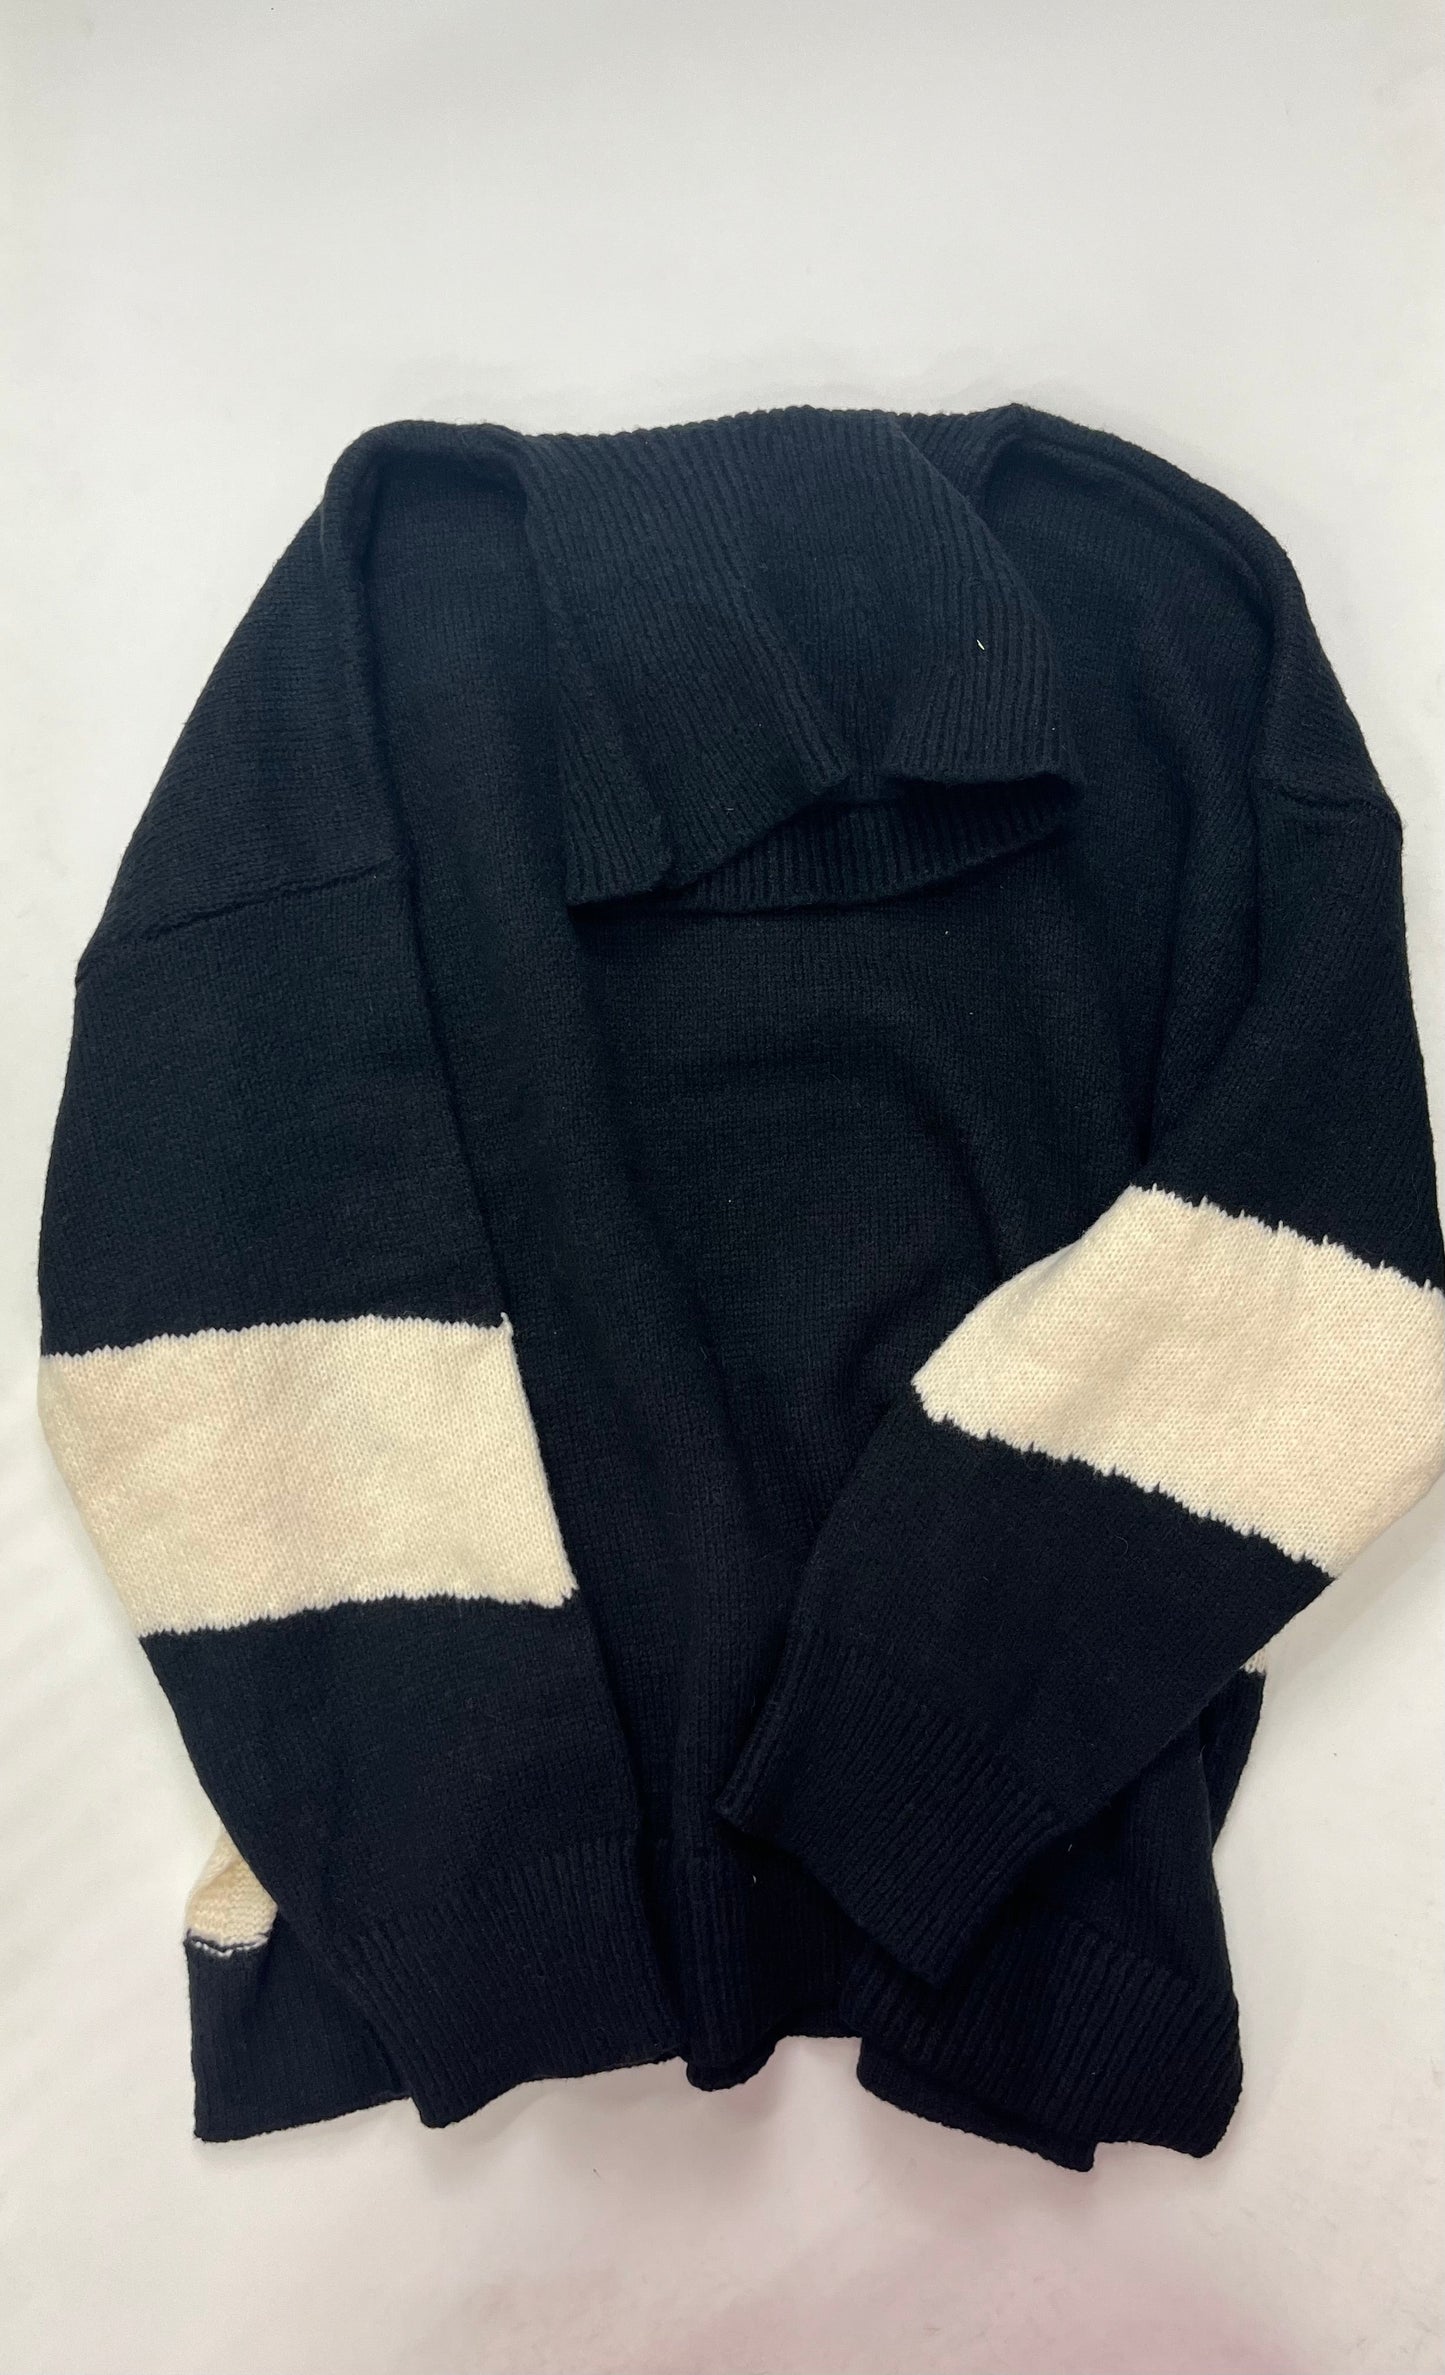 Black Sweater Simple NWT, Size 1x